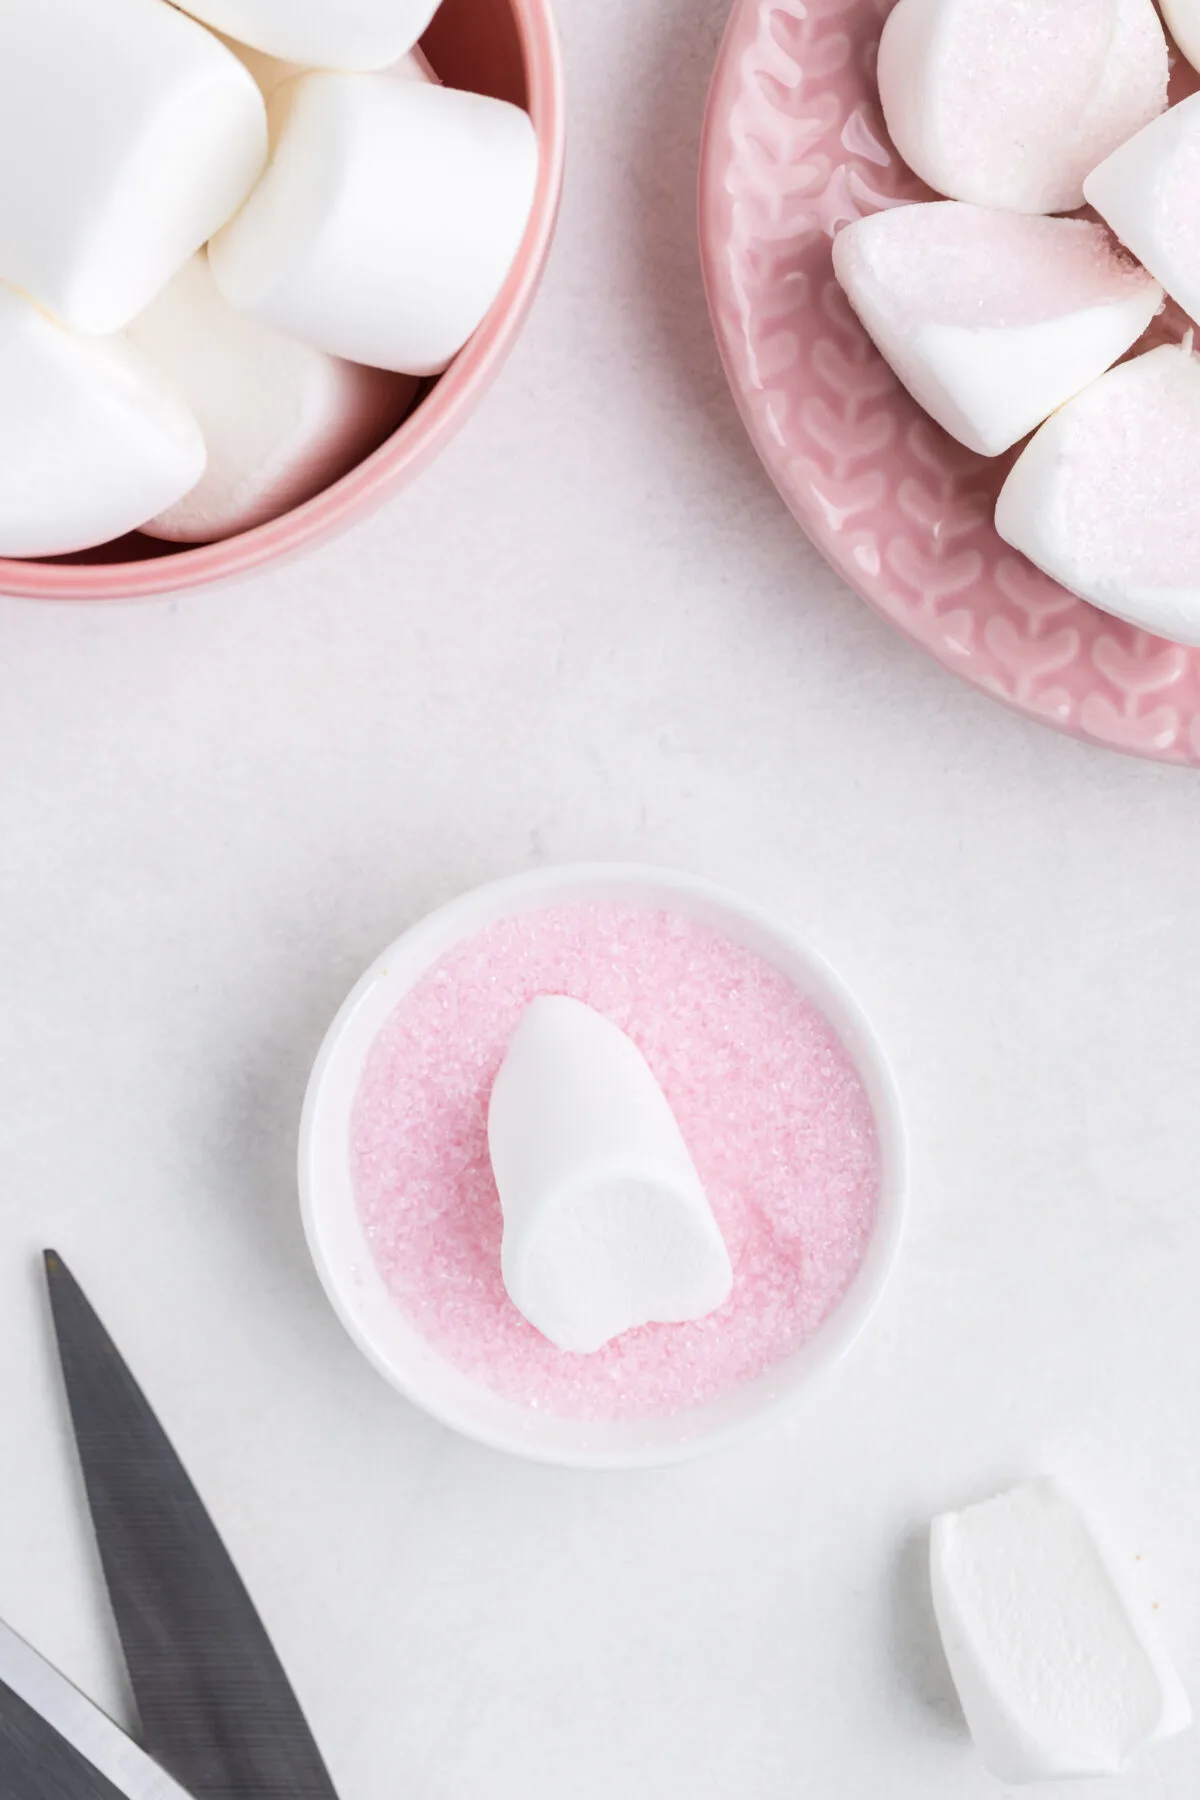 Half a marshmallow sitting in a small bowl of pink sprinkles.